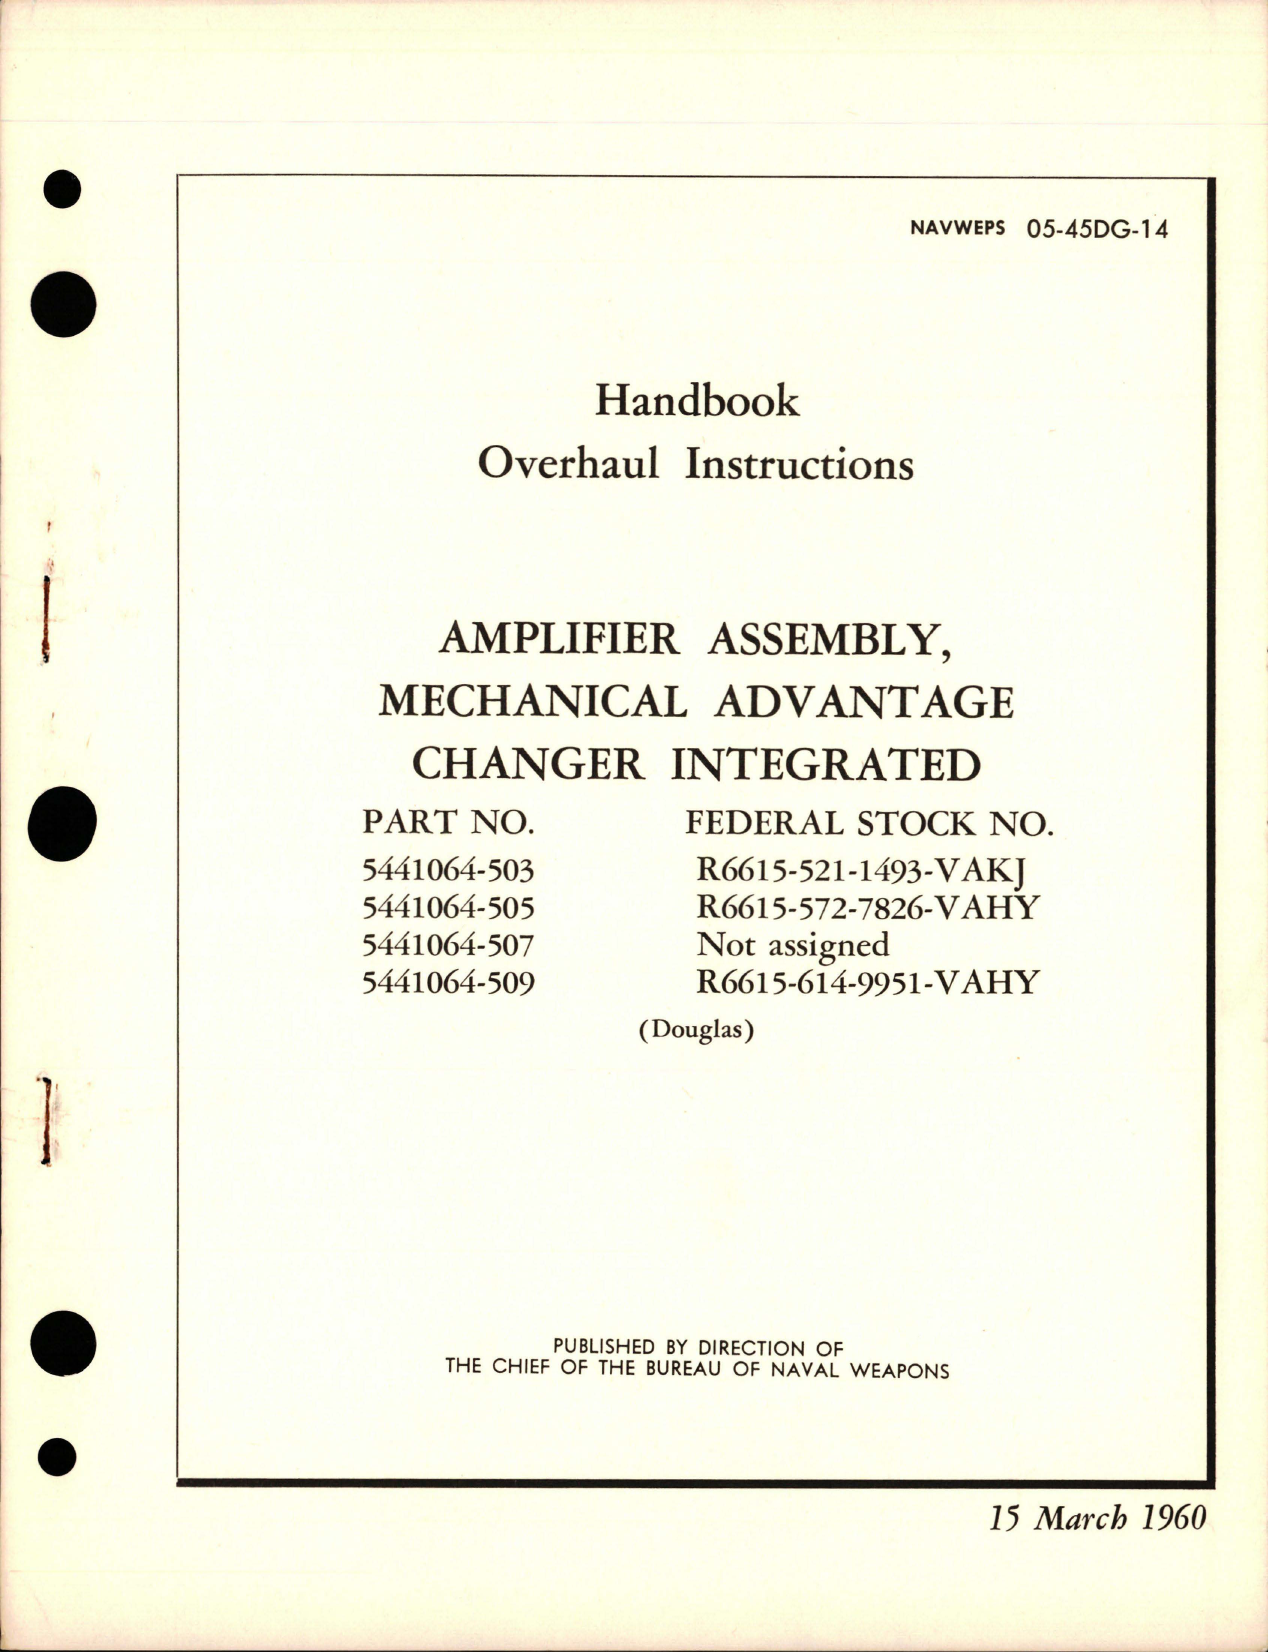 Sample page 1 from AirCorps Library document: Overhaul Instructions for Amplifier Assembly, Mechanical Advantage Changer Integrated